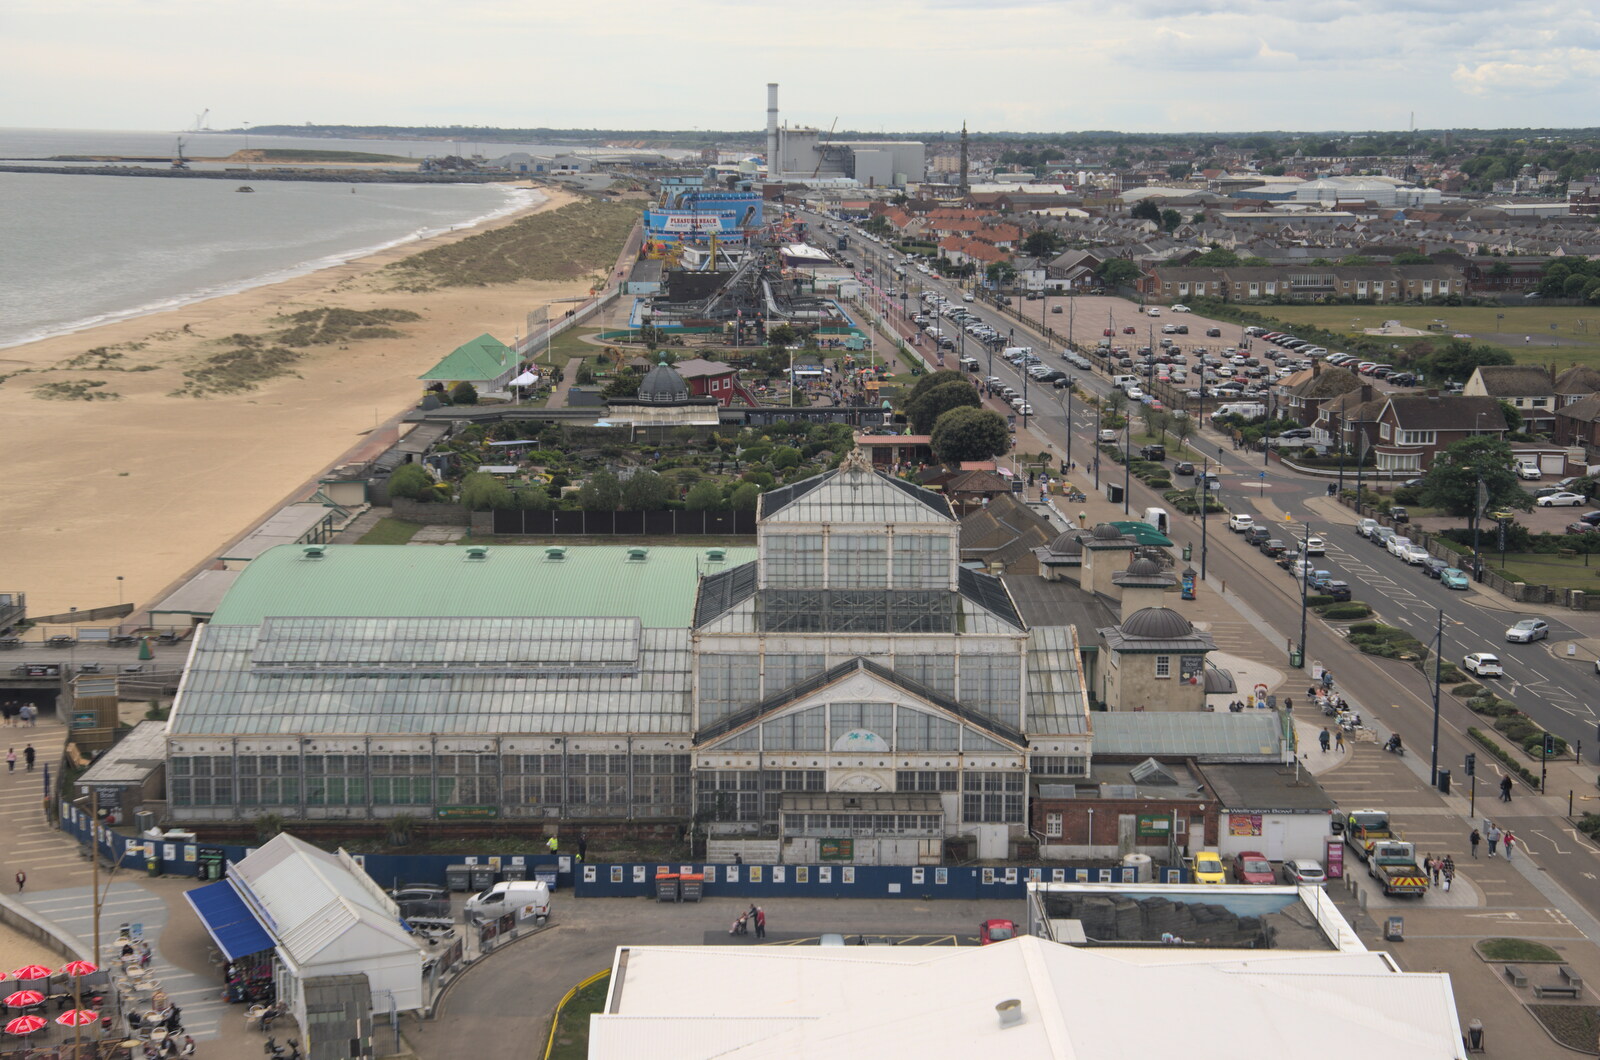 The Winter Gardens, and the Pleasure Beach from Faded Seaside Glamour: A Weekend in Great Yarmouth, Norfolk - 29th May 2022